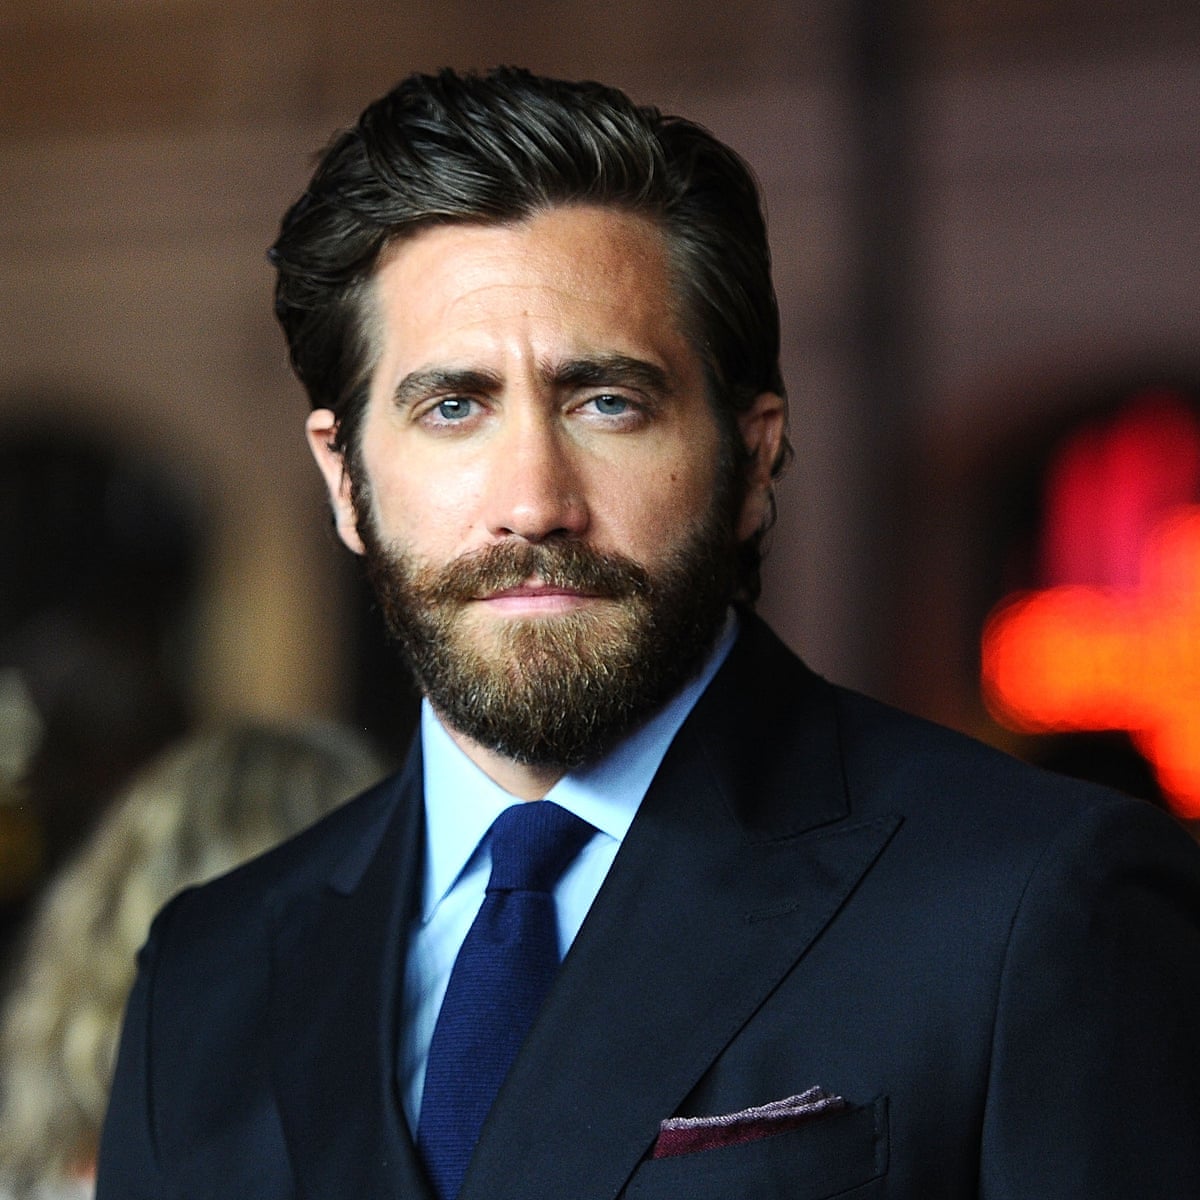 Jake Gyllenhaal from the movie Love & Other Drugs